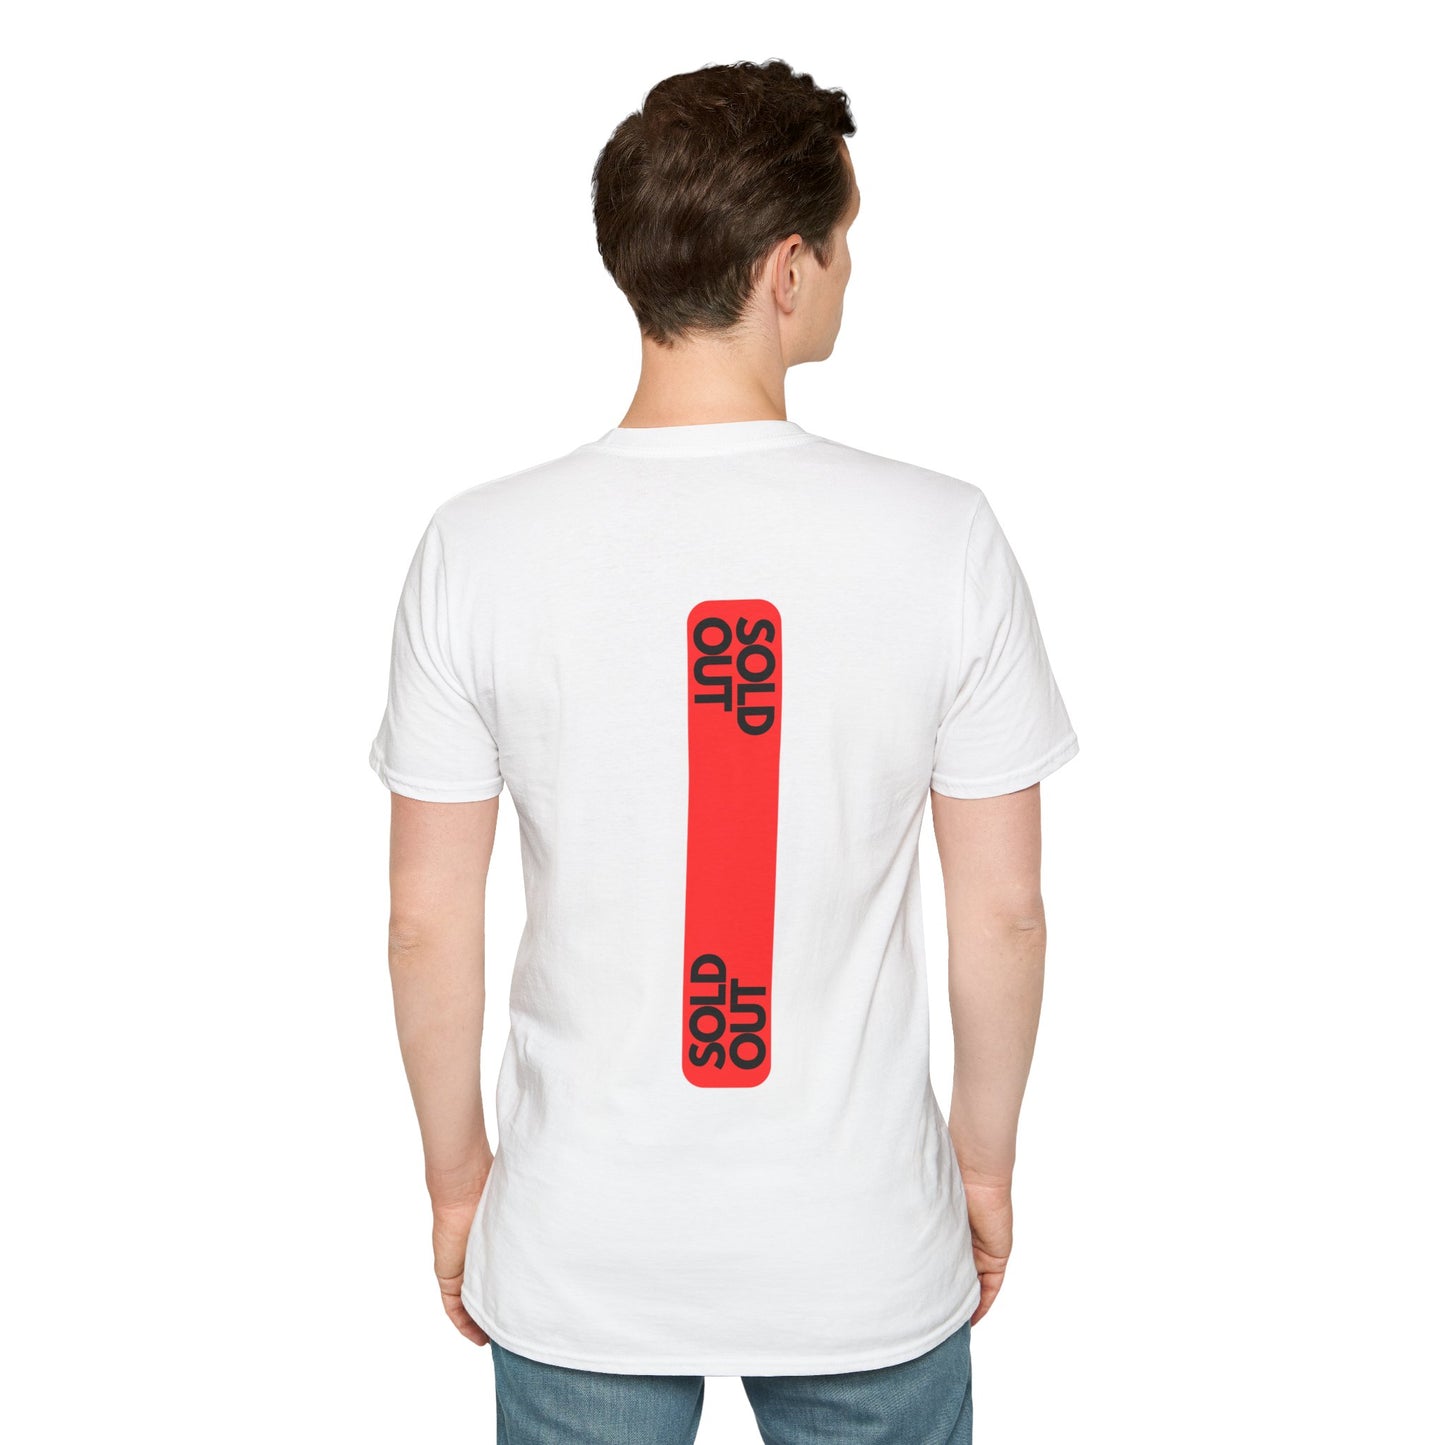 White T-shirt with a striking red tag design and the text ‘SOLD OUT’ in bold letters